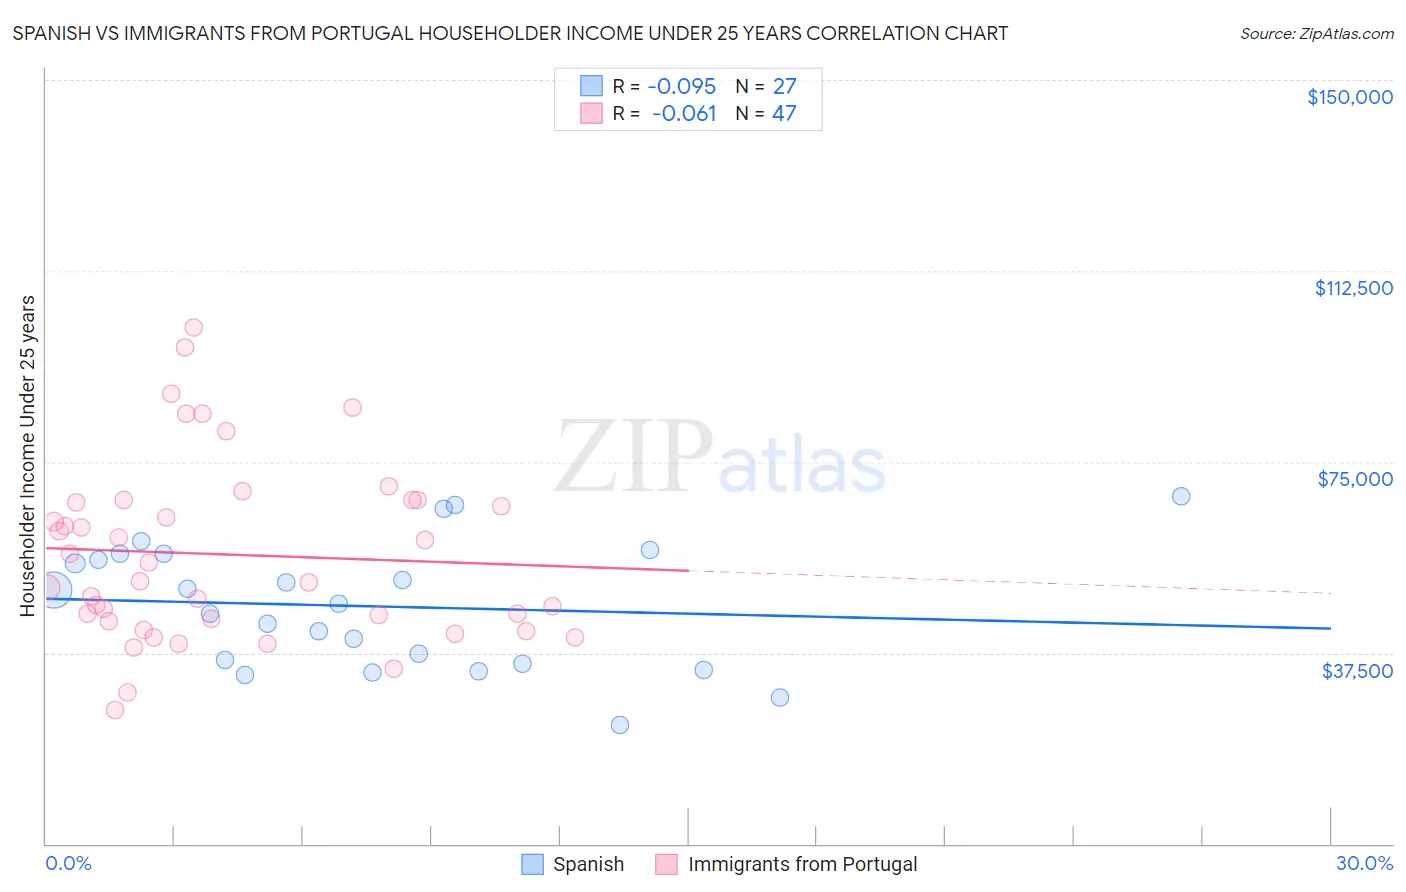 Spanish vs Immigrants from Portugal Householder Income Under 25 years